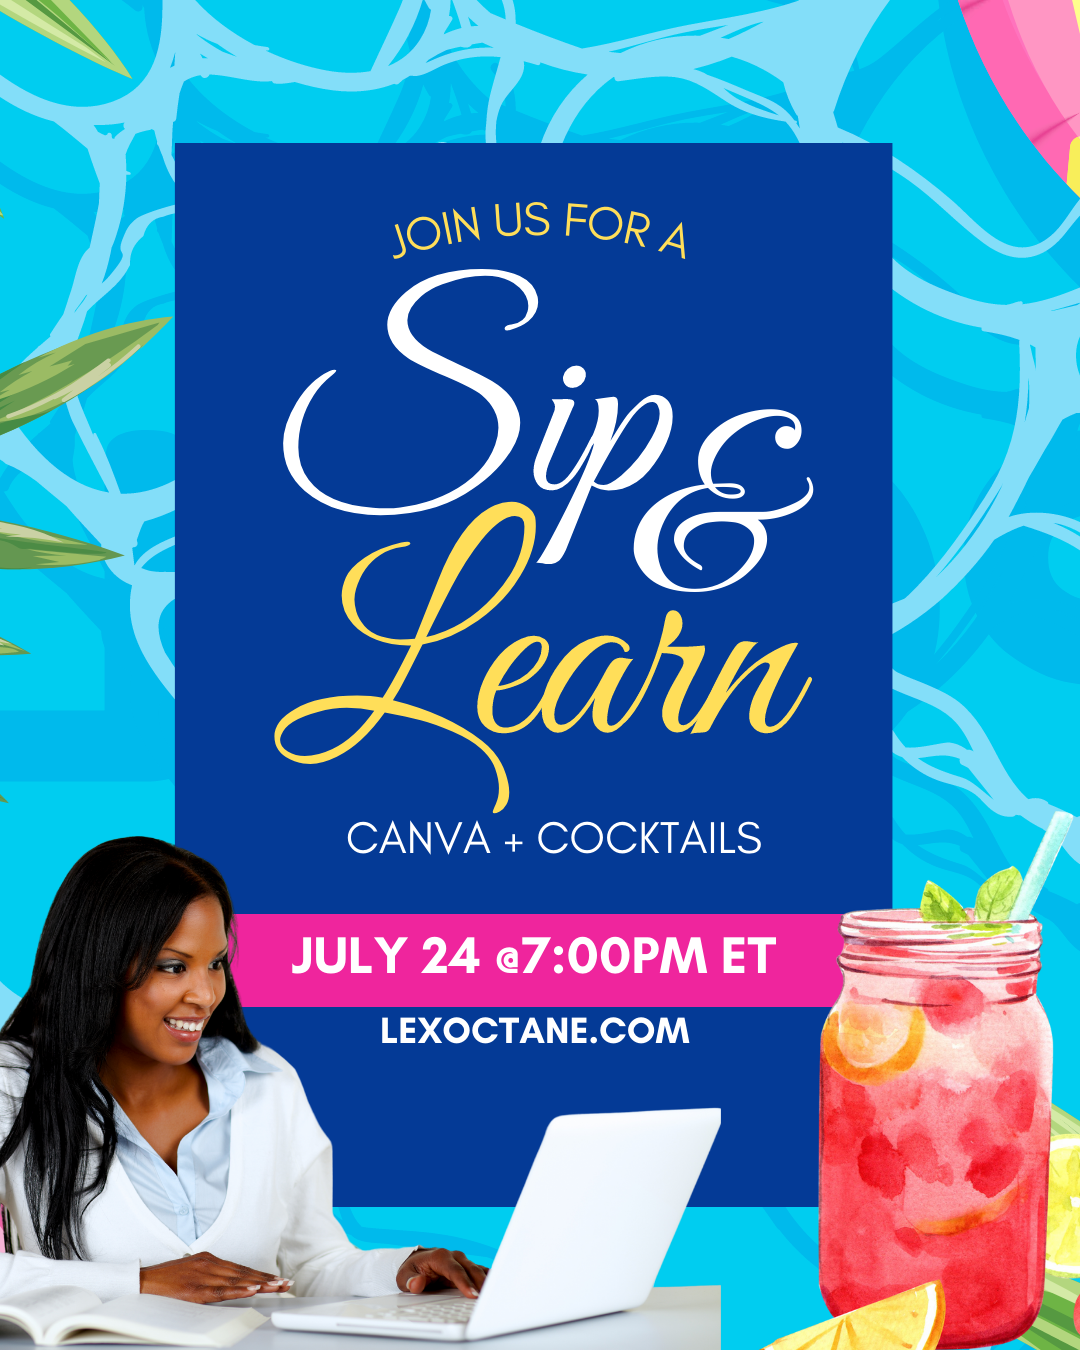 Octane and WordSmith team up for a Sip & Learn online event